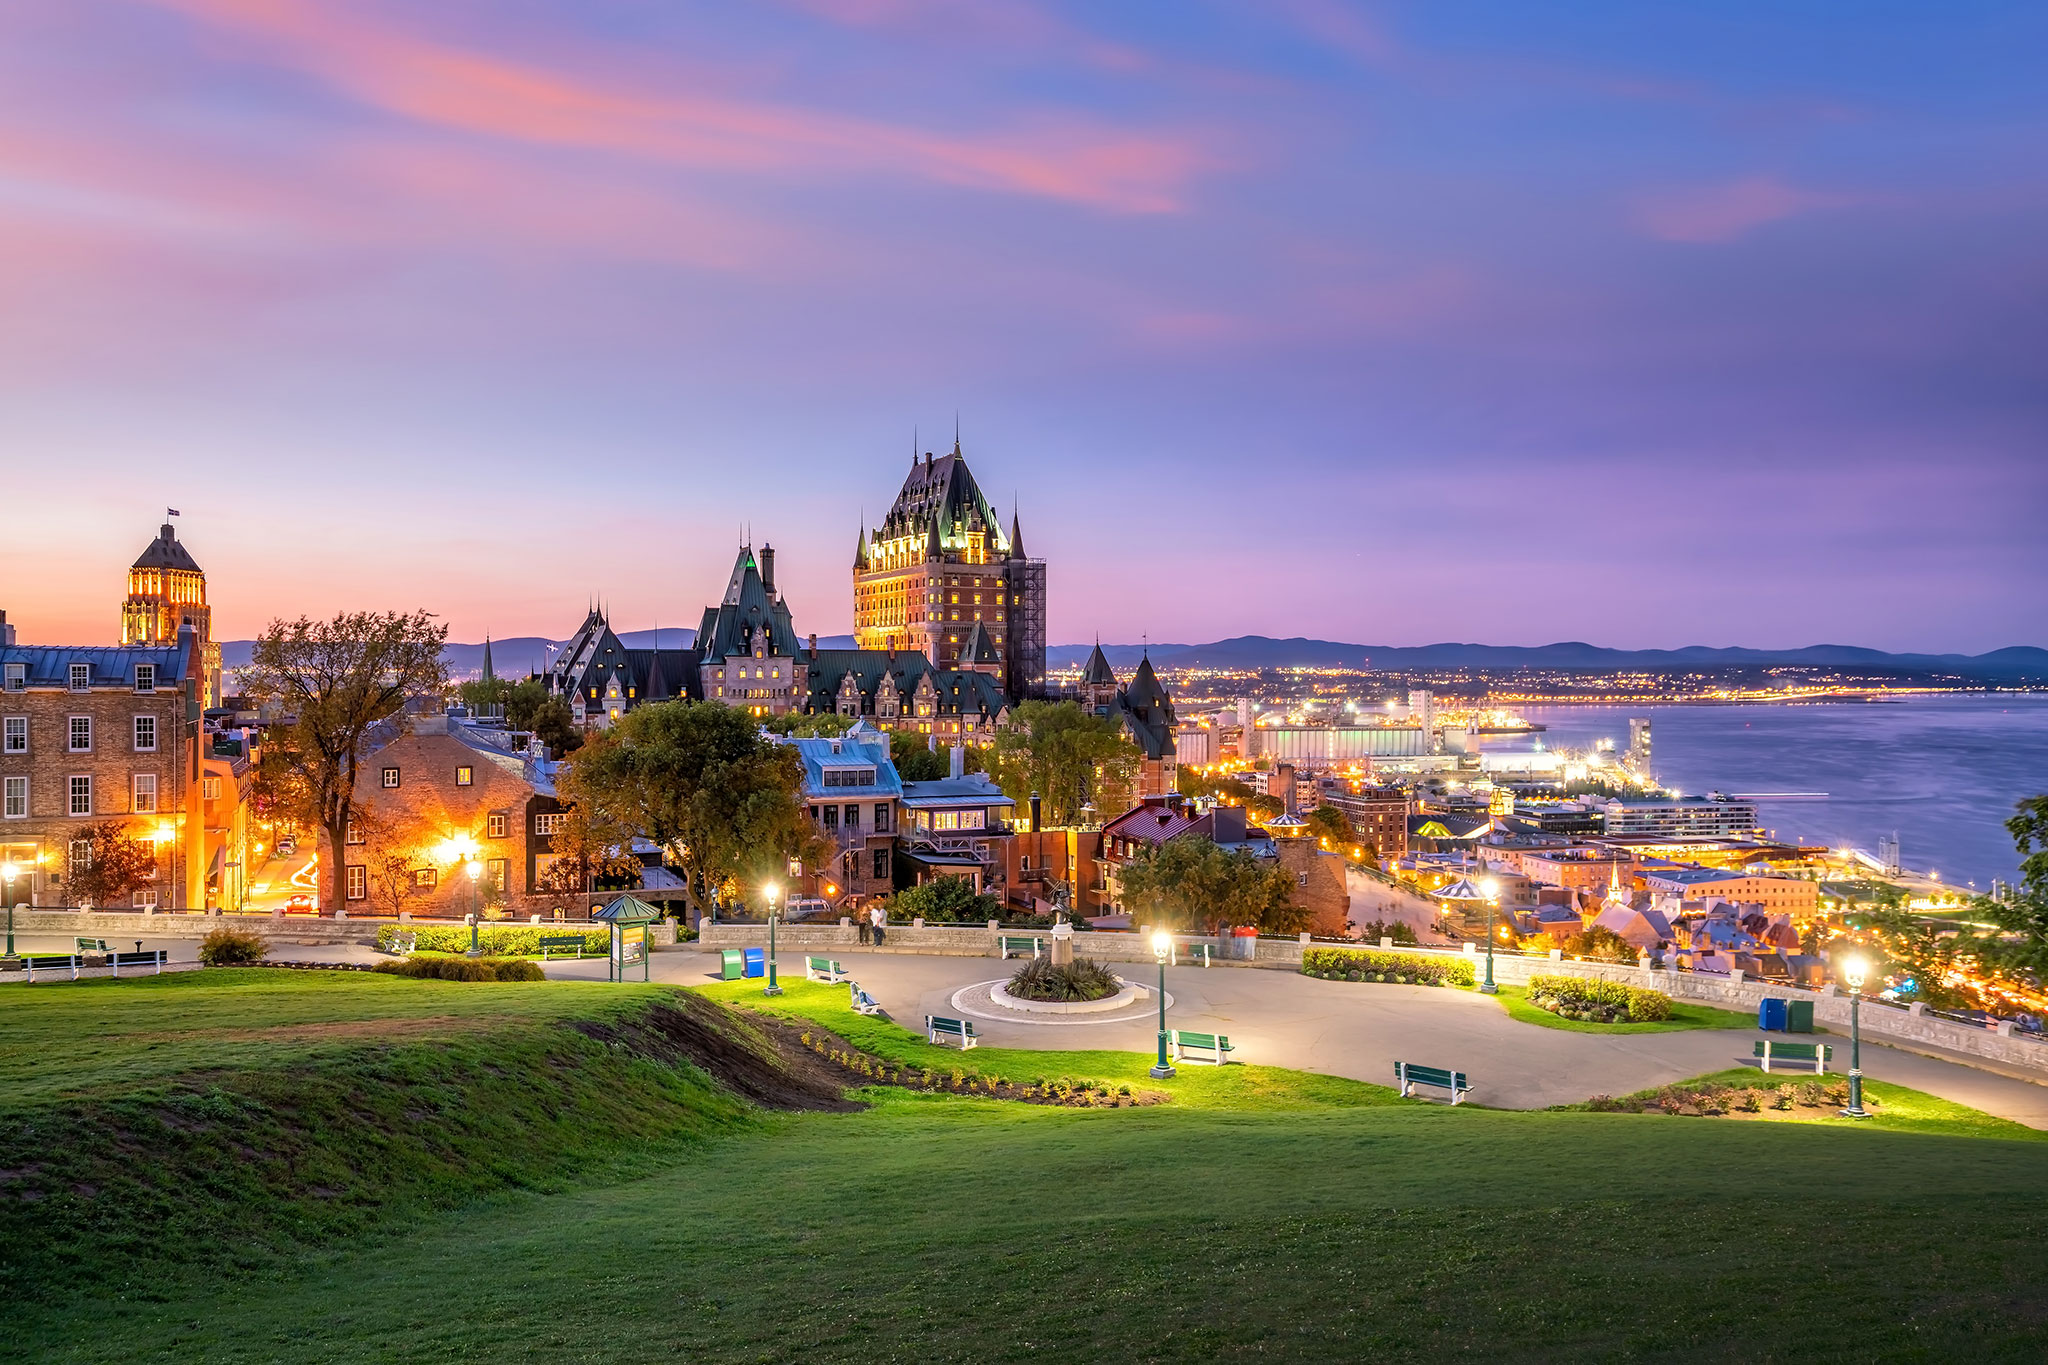 Panoramic view of the Québec City skyline during a soft lilac sunset with the Saint Lawrence River in the background.